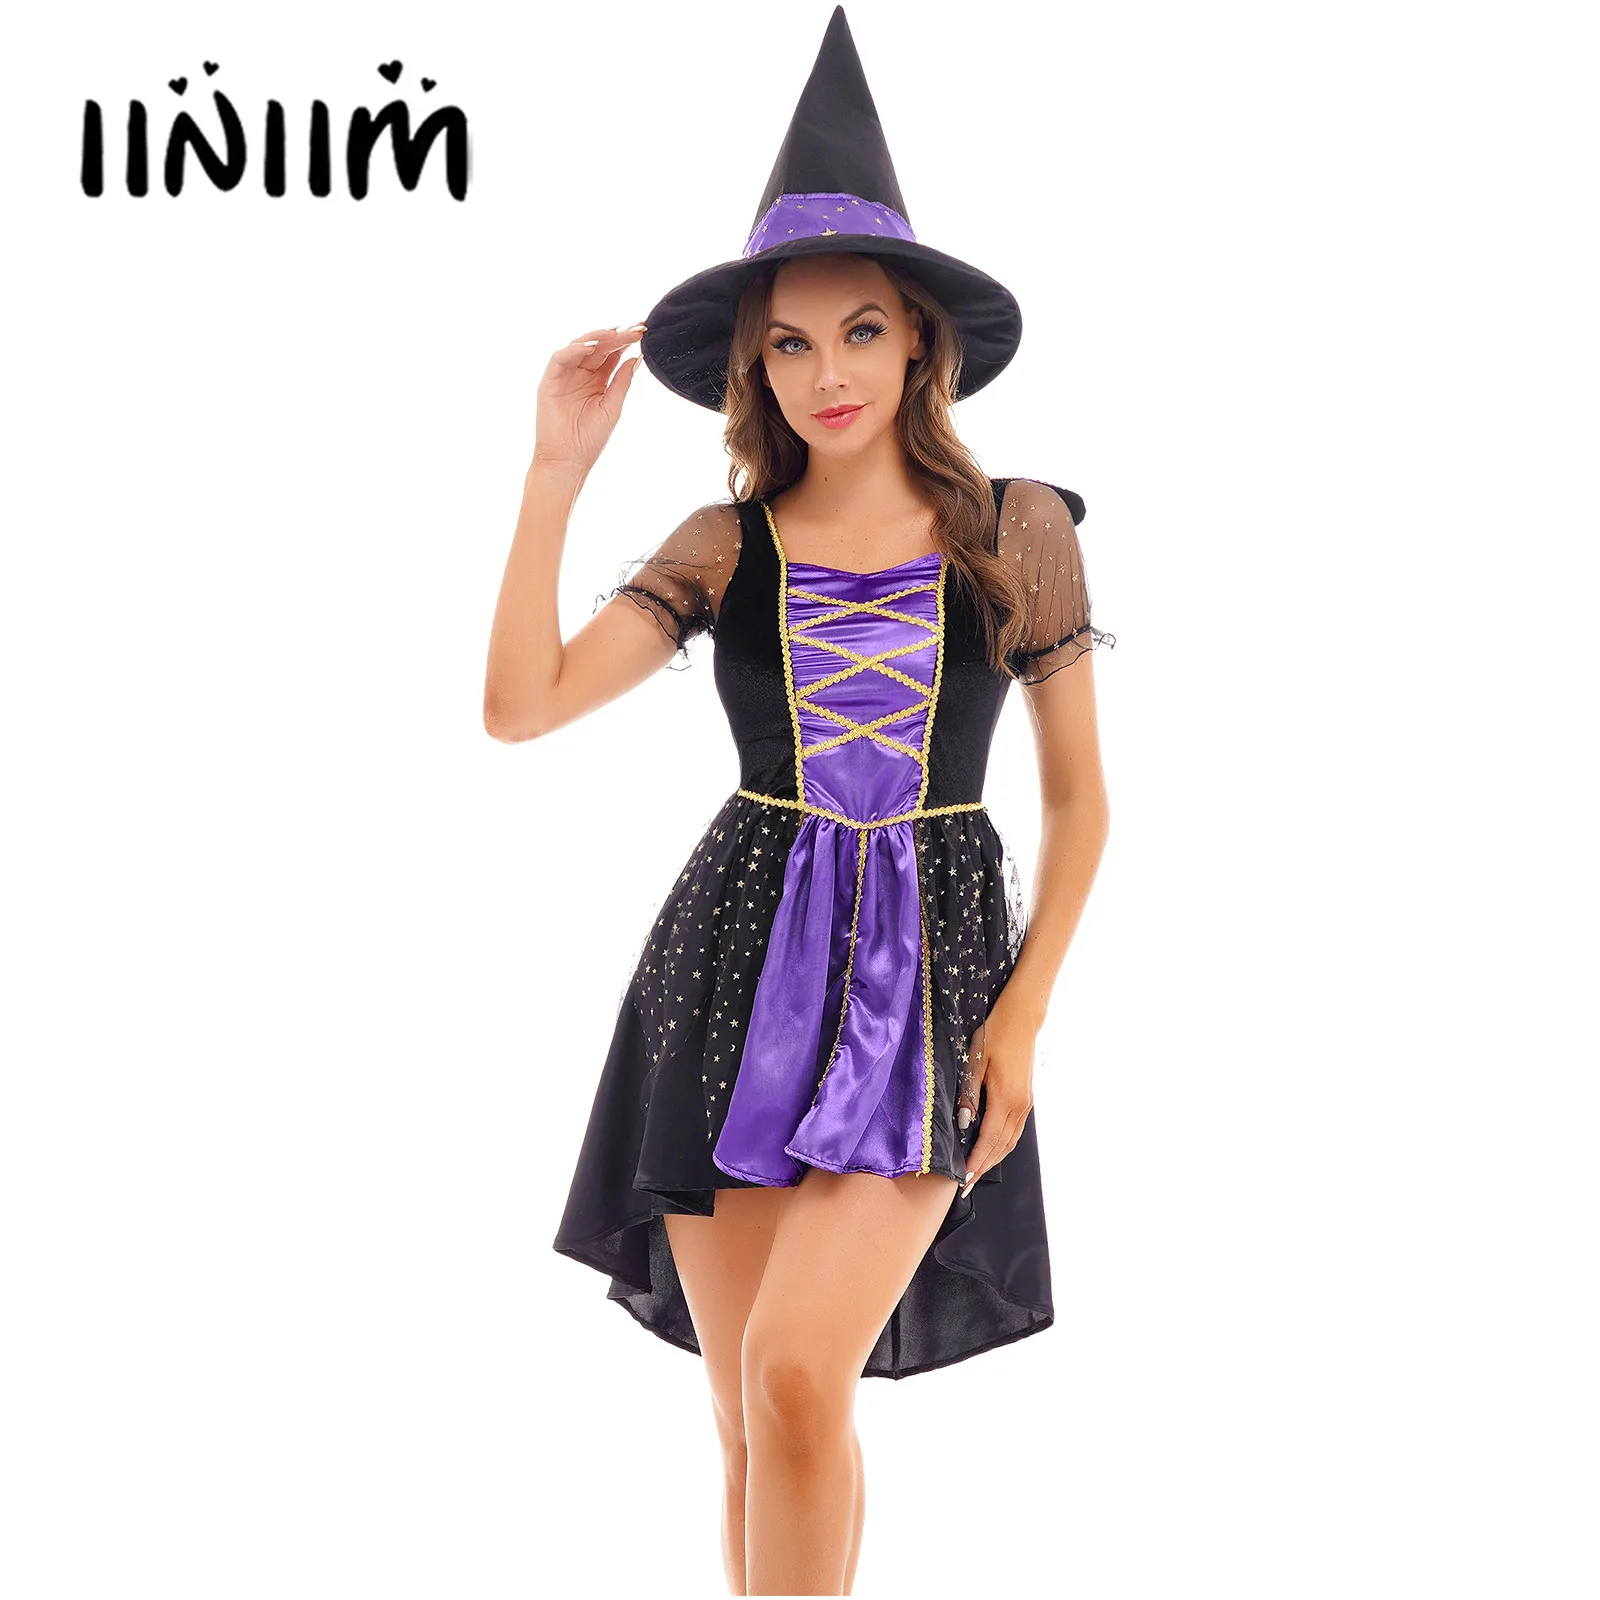 

Womens Halloween Performance Costume Vampire Witch Role Play Fancy Dress Up Outfit Puff Sleeve Asymmetrical Hem Dress with Hat